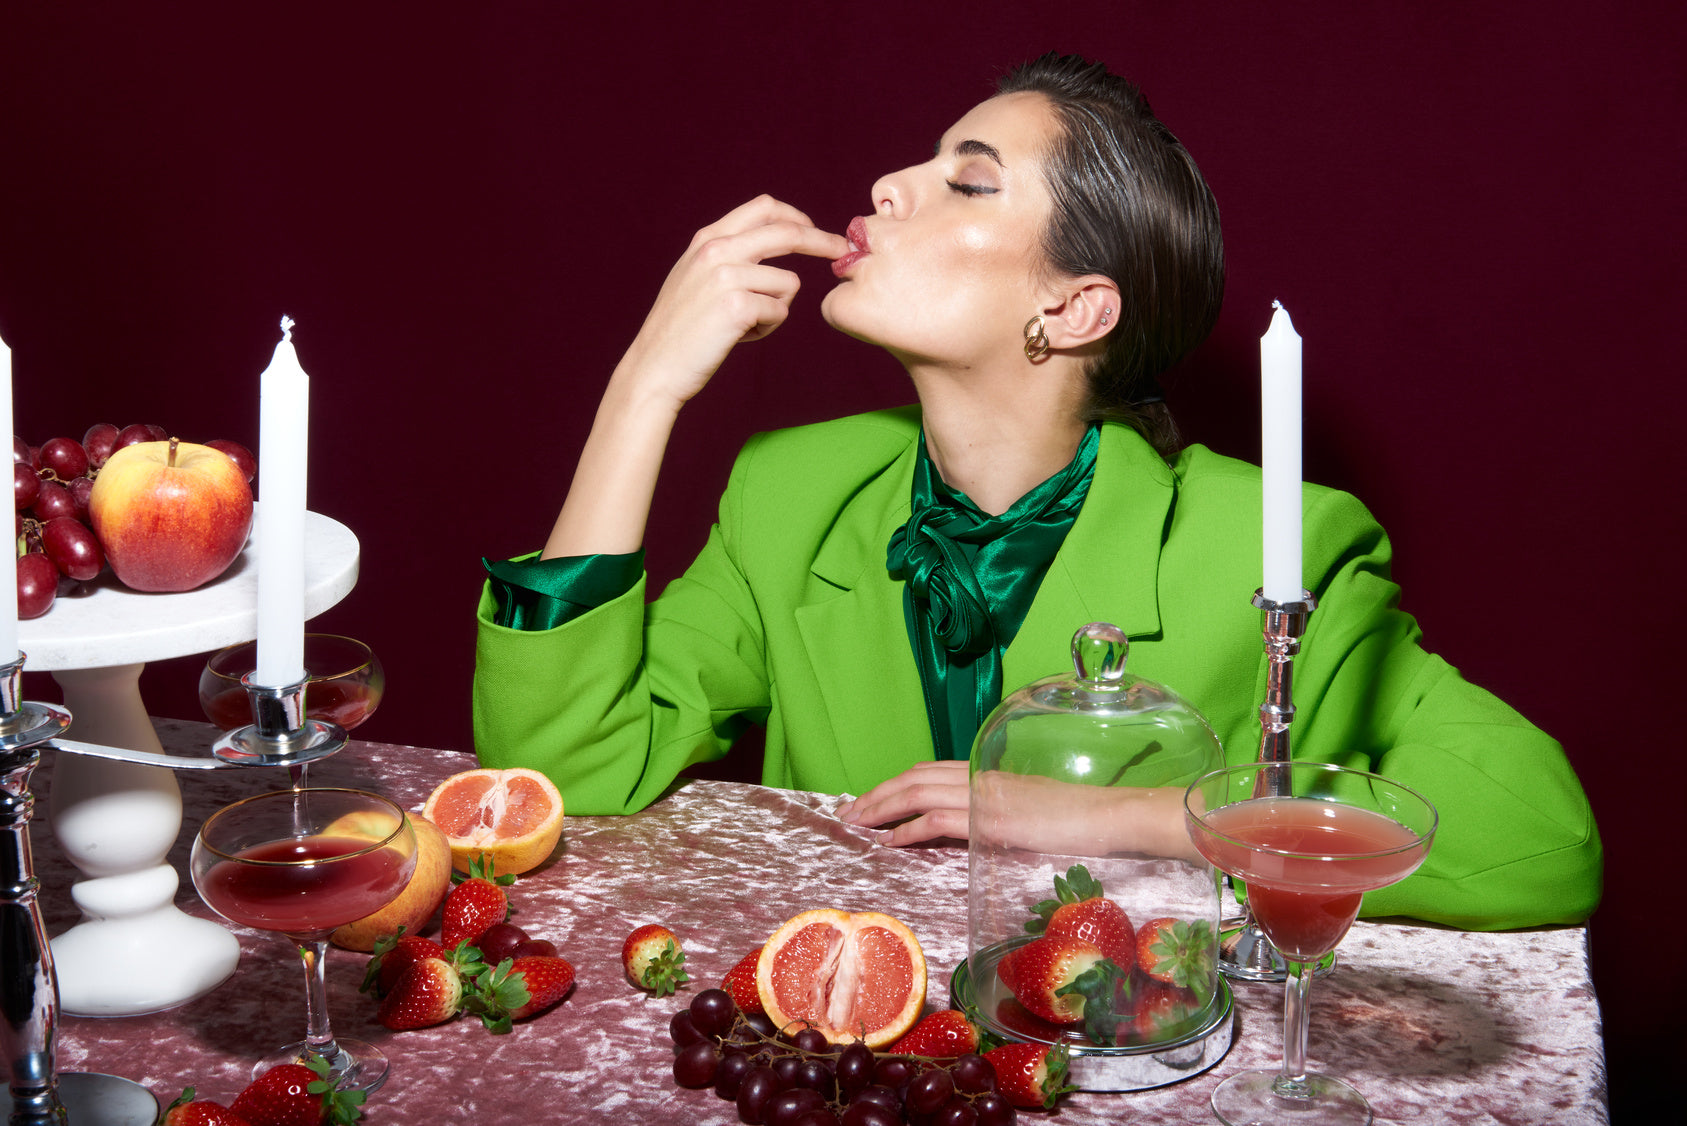 woman licking fingers near table with fruit